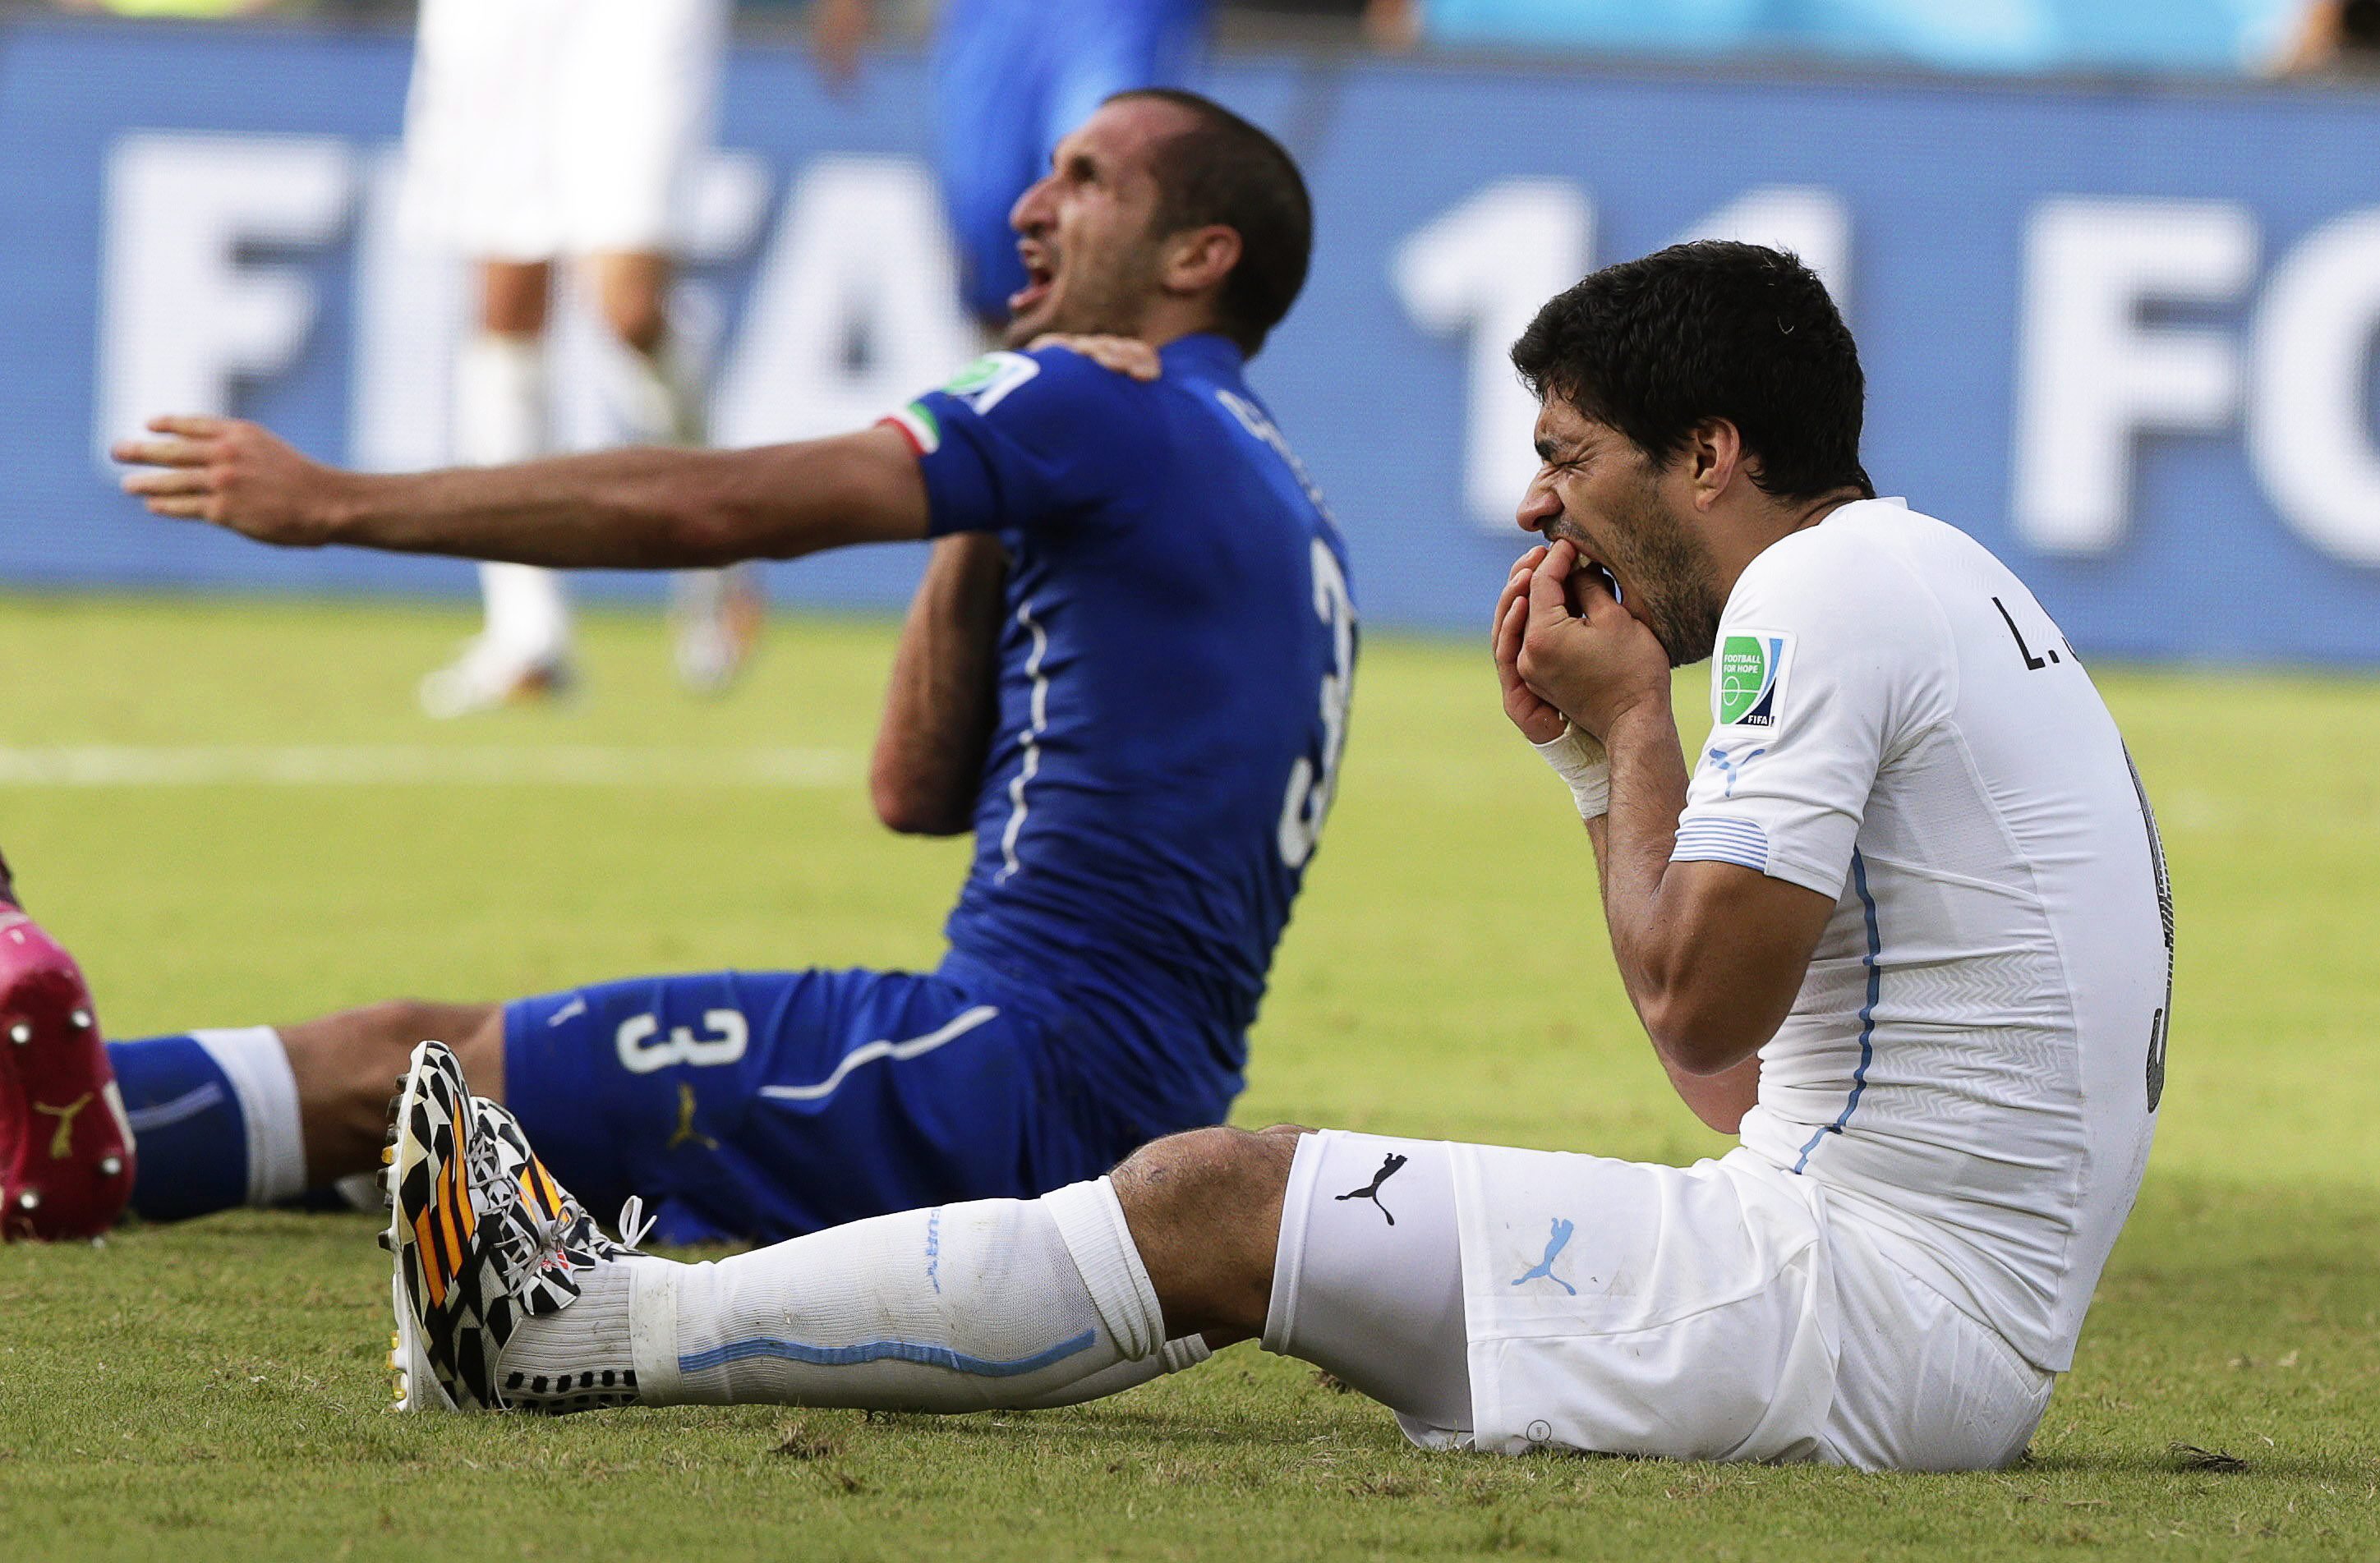 Giorgio Chiellini claims he was bitten by Uruguay's Luis Suarez during the FIFA World Cup 2014 group D preliminary round match between Italy and Uruguay at the Estadio Arena das Dunas in Natal, Brazil on June 24, 2014.